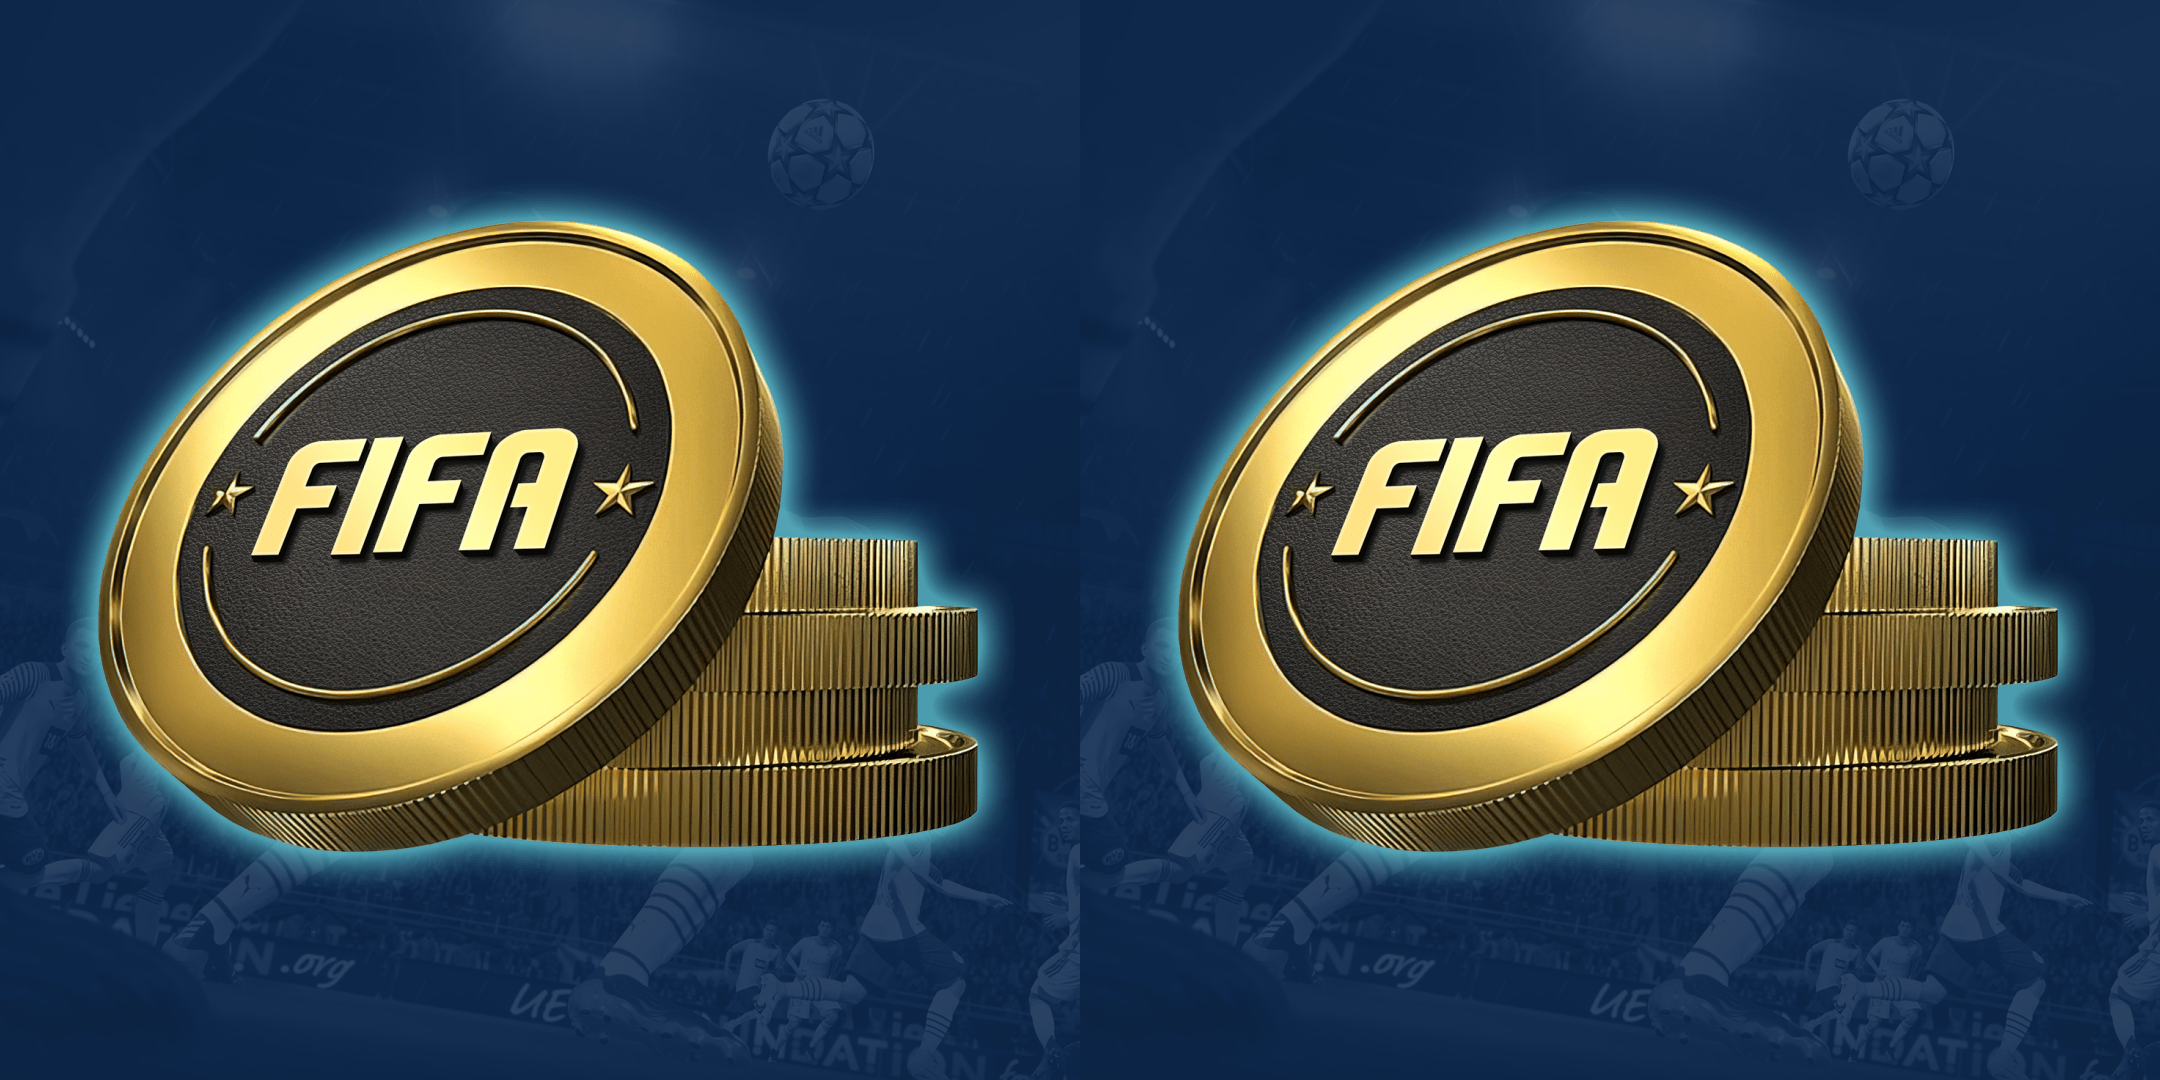 Here's How To Buy Fifa coins